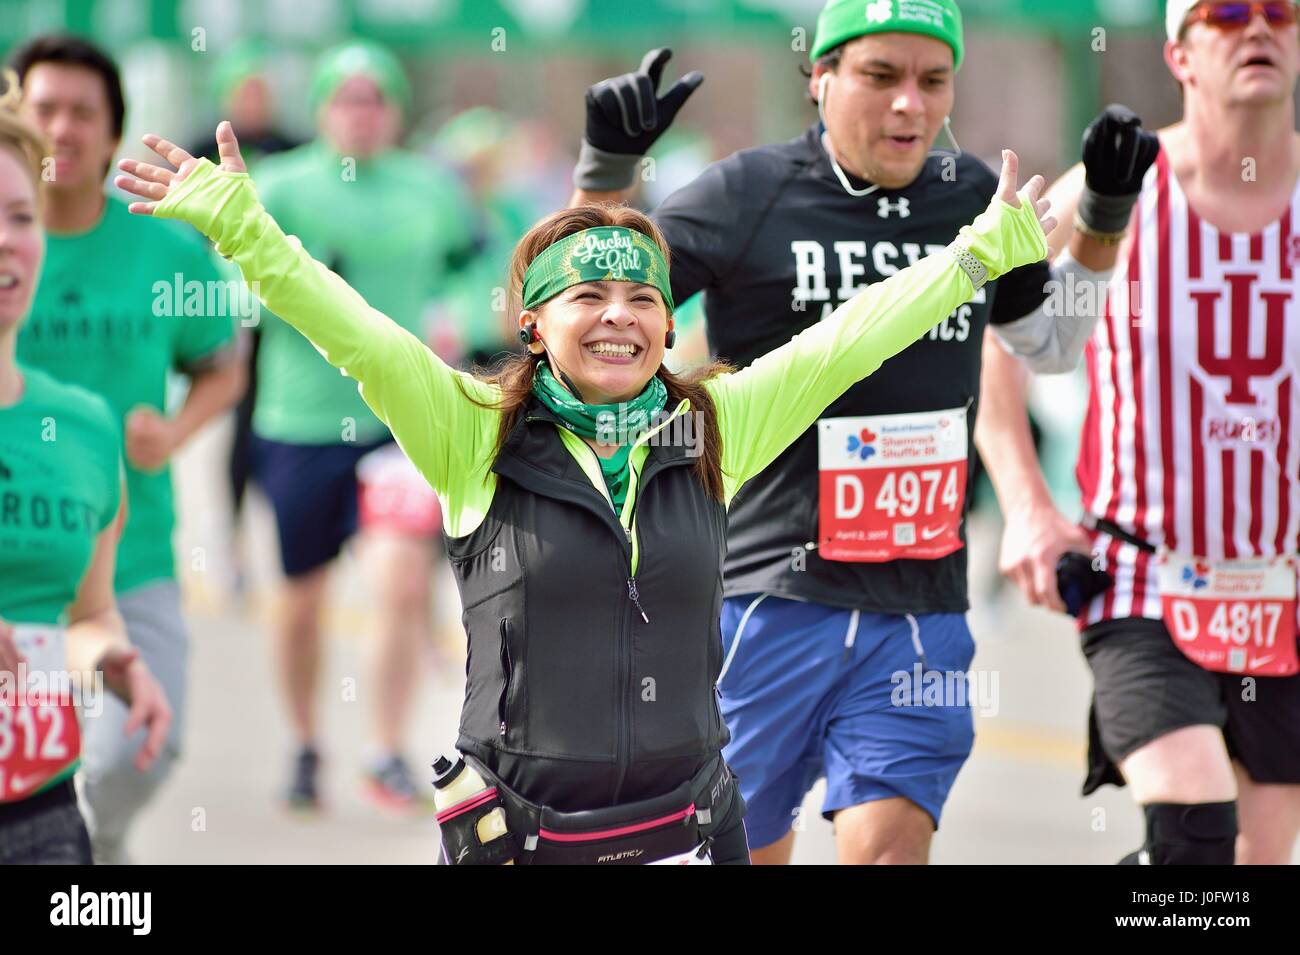 Very happy runner crossing the finish line at the 2017 Shamrock Shuffle race in Chicago, Illinois, USA. Stock Photo